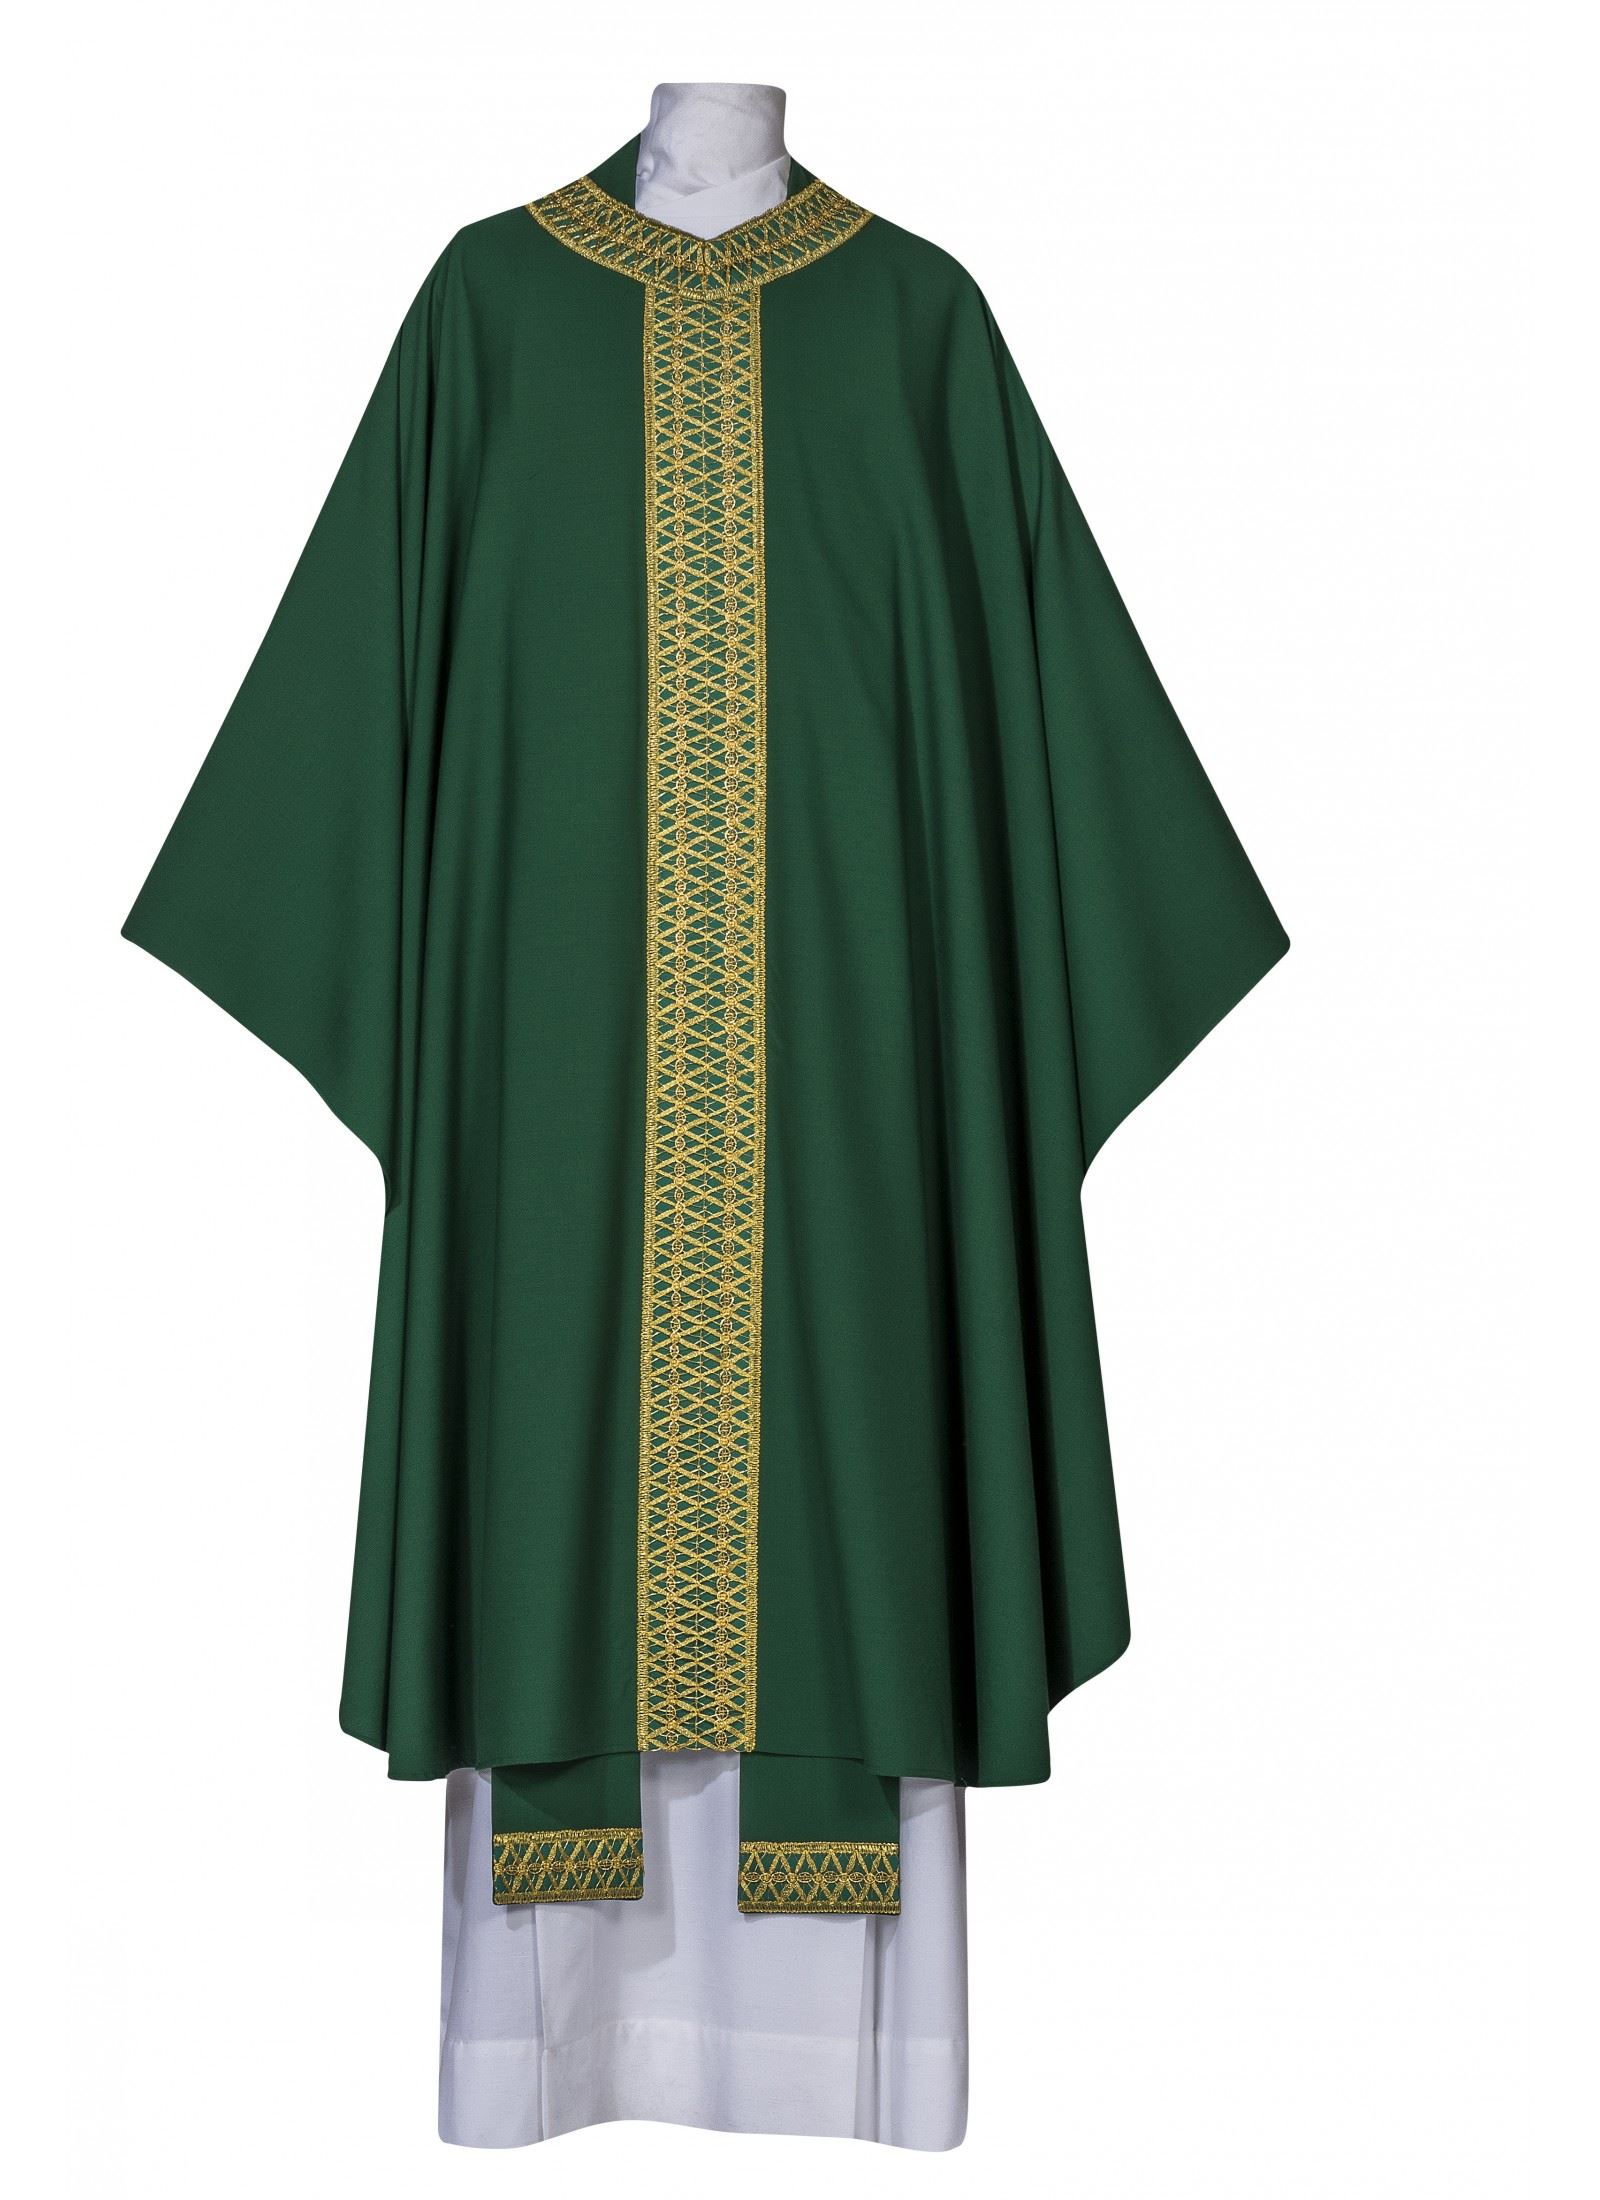 Sienna Chasuble in Green Europa Fabric with Plain Neckline from Italy